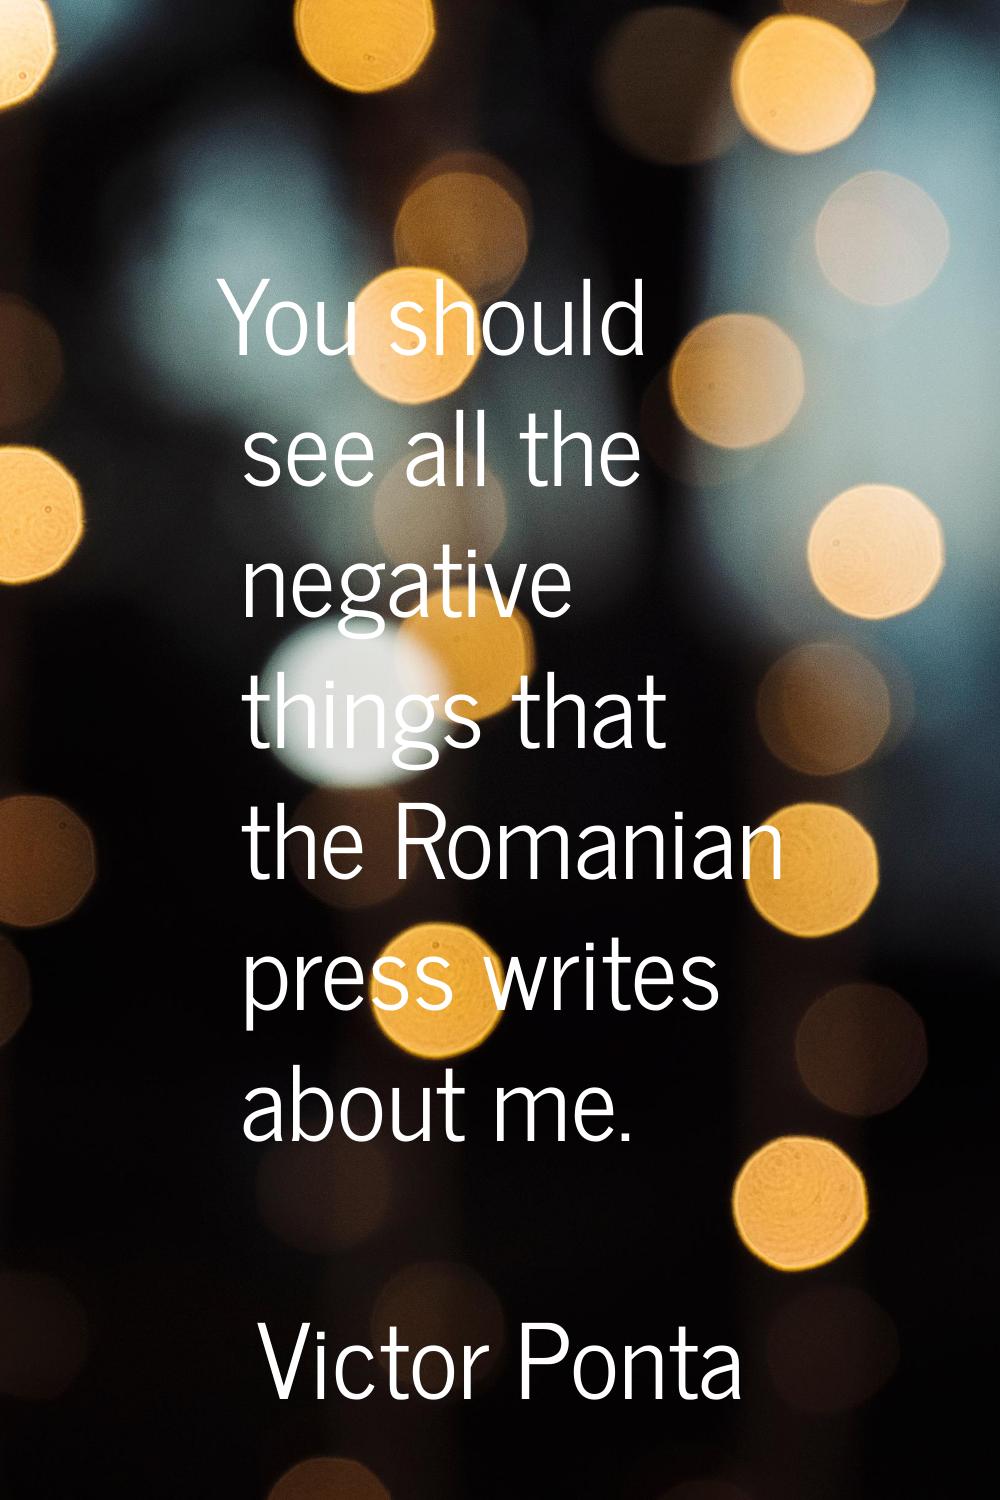 You should see all the negative things that the Romanian press writes about me.